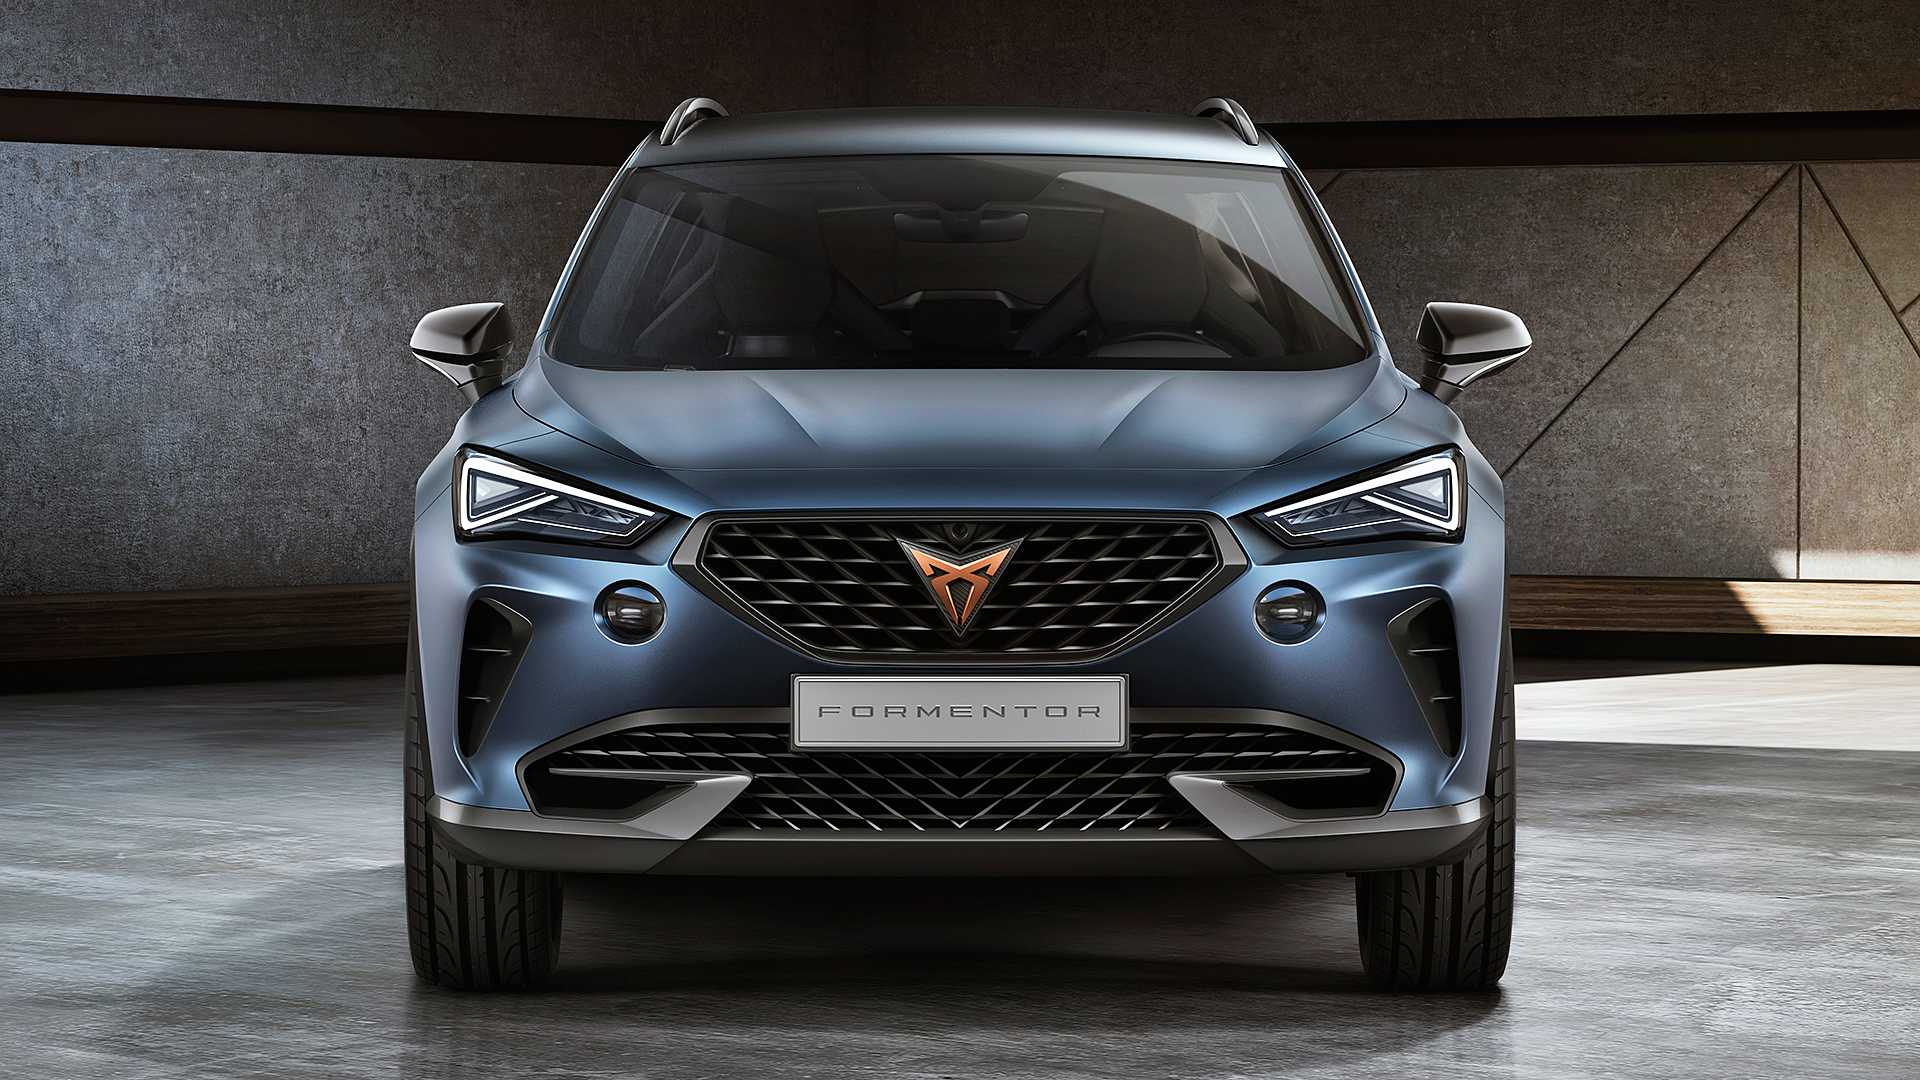 The CUPRA Formentor premieres at The Geneva Motor Show